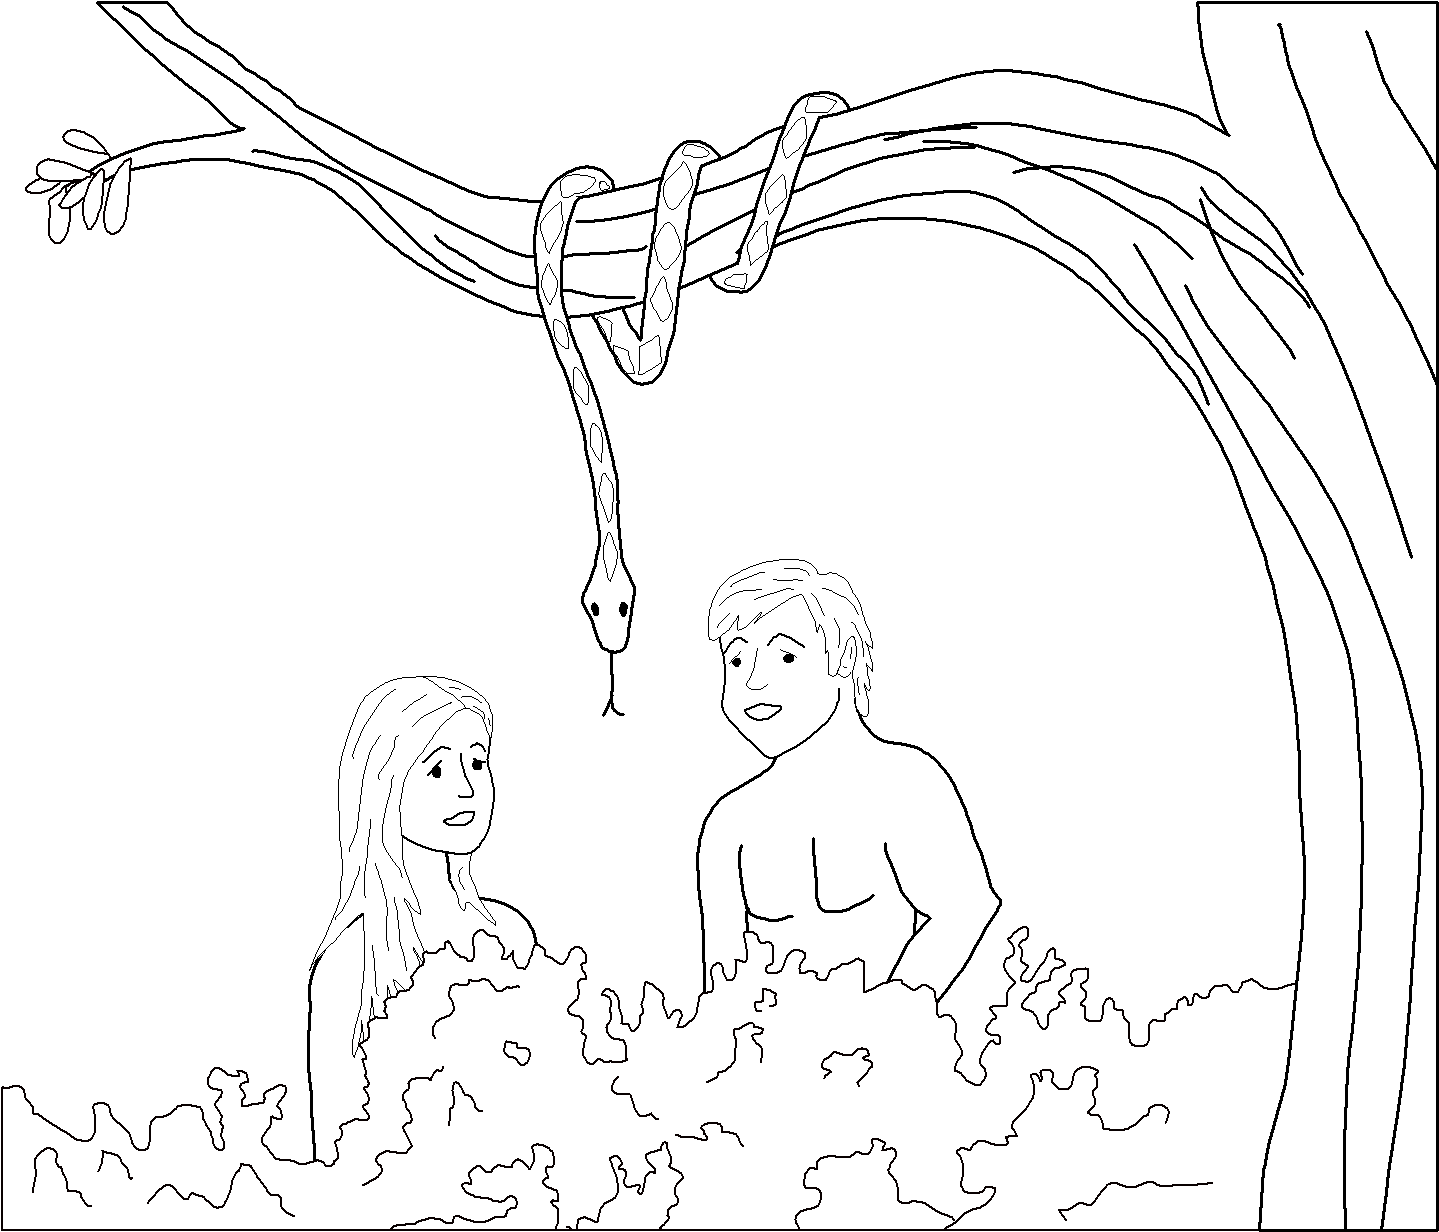 11 Pics of Adam And Eve Bible Coloring Pages - Adam and Eve ...